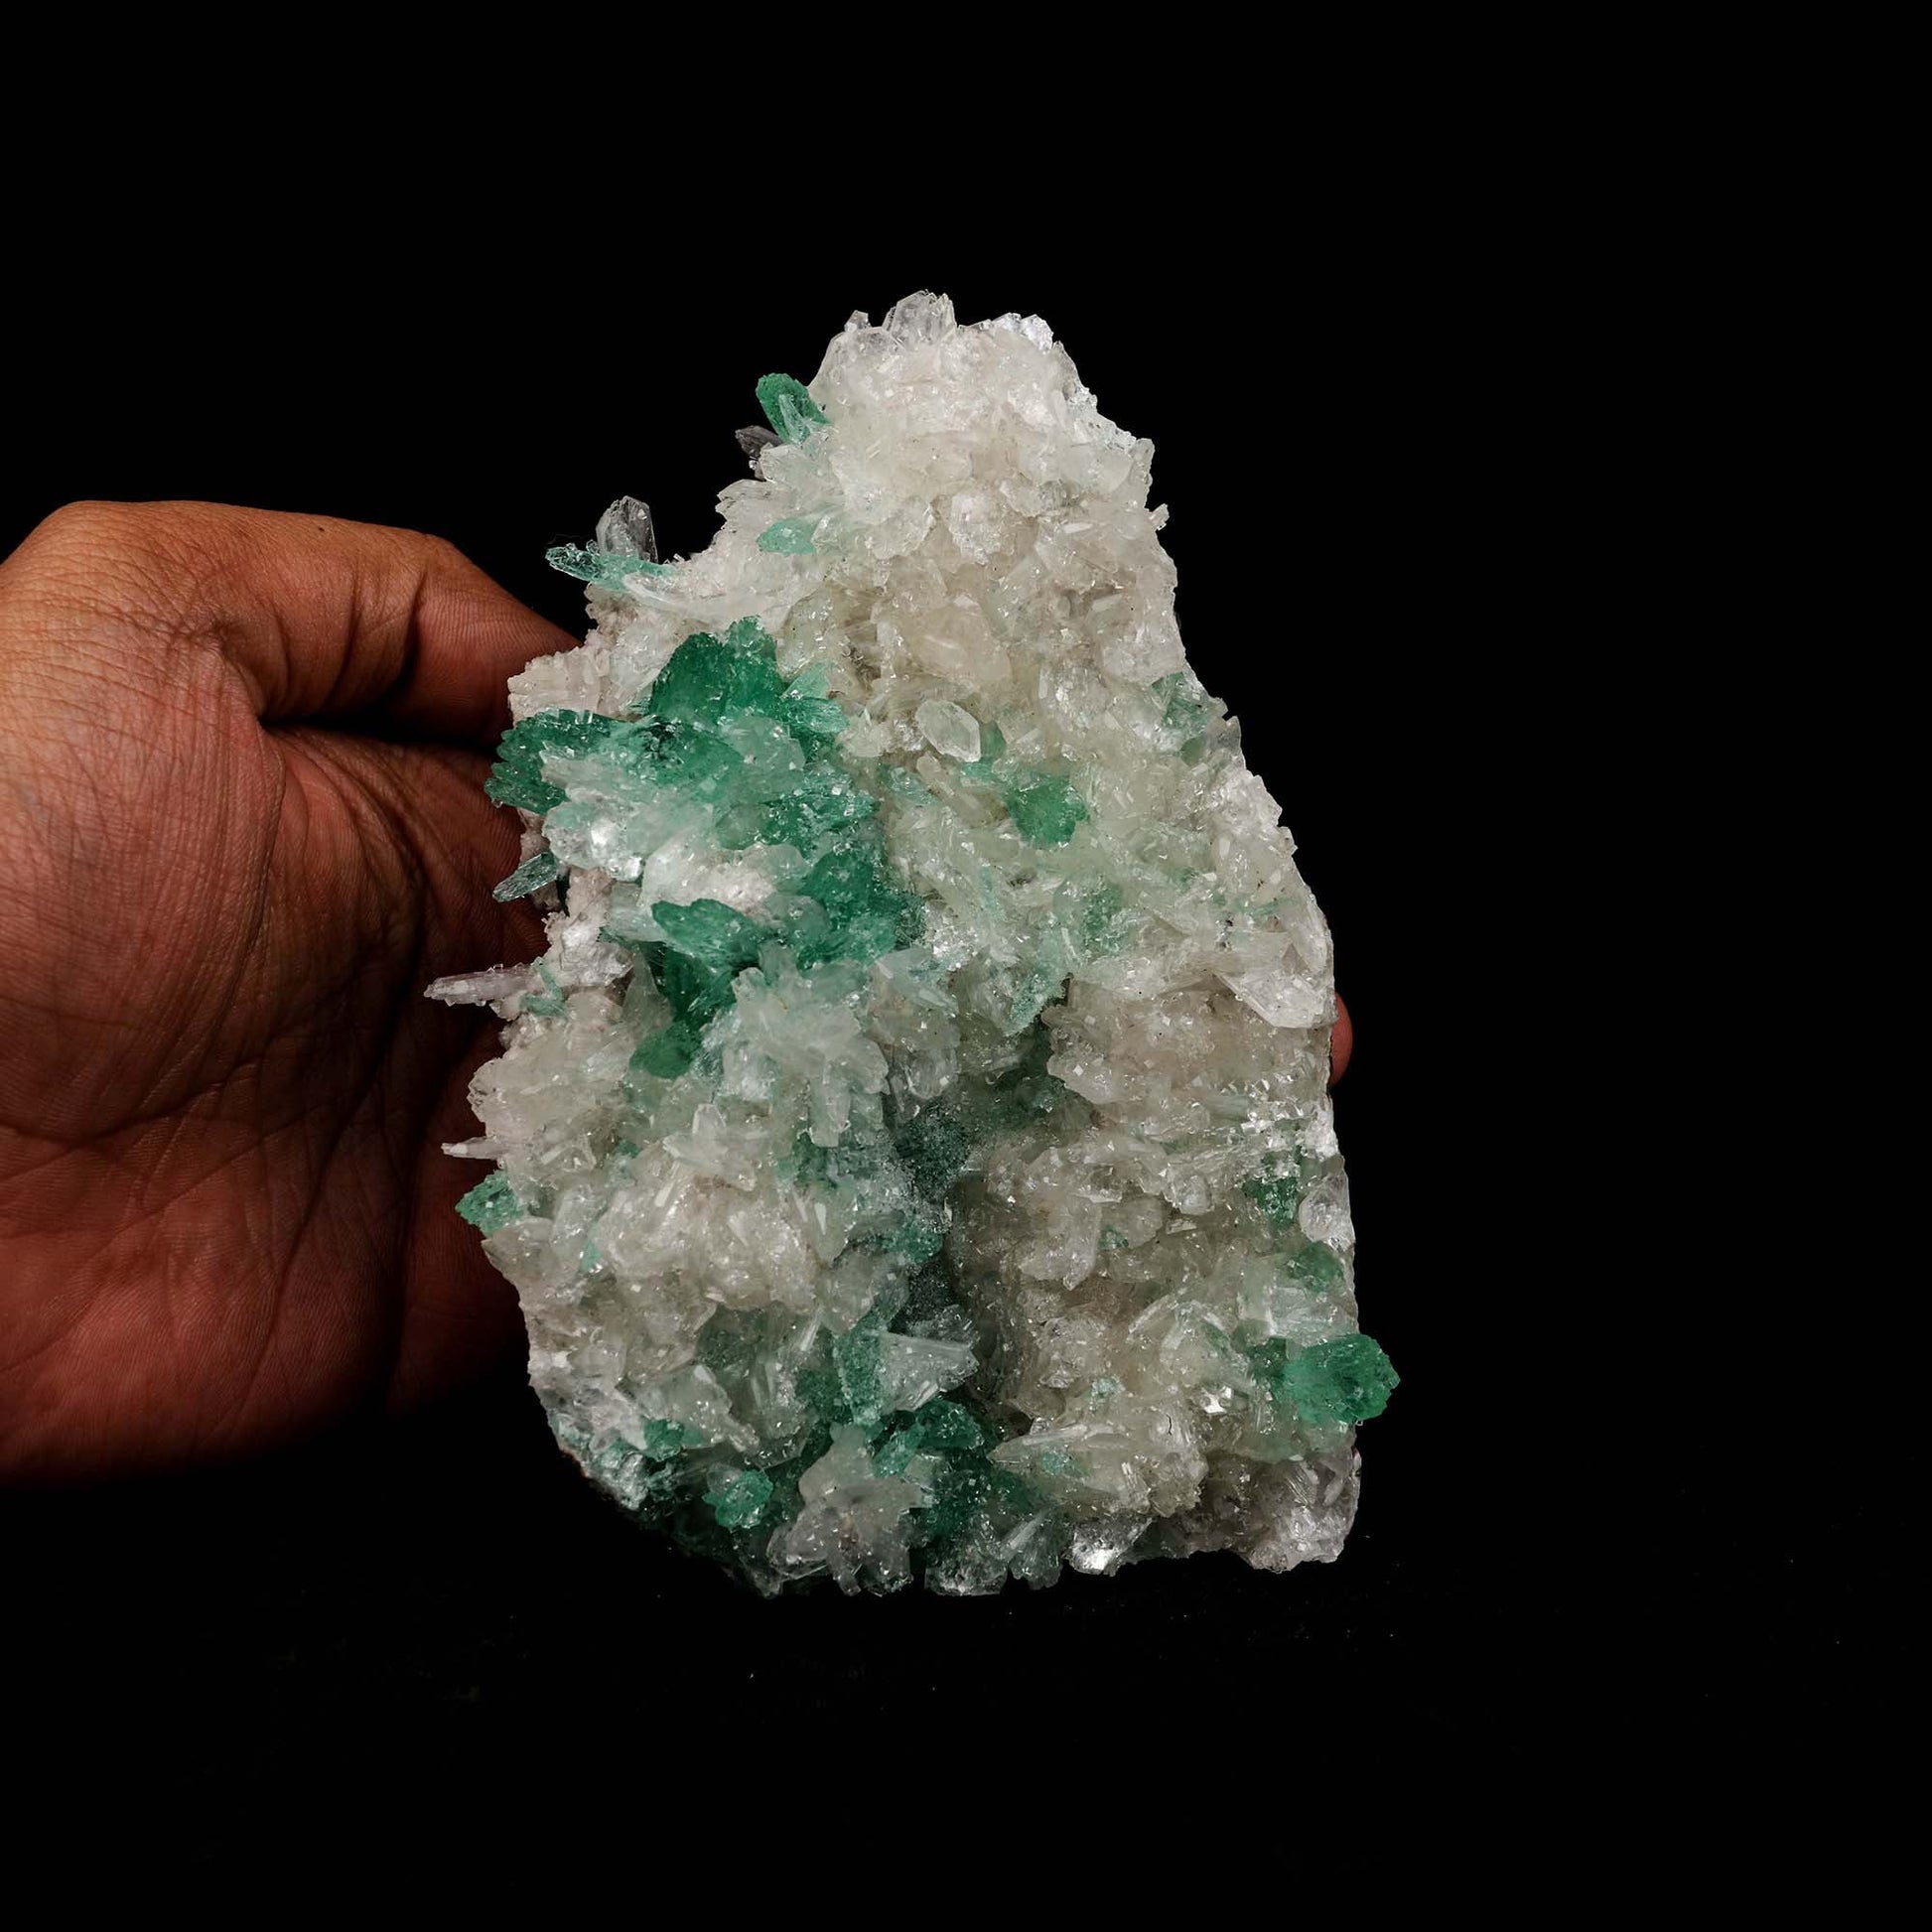 Green Apophyllite with Stilbite Natural Mineral Specimen # B 5200  https://www.superbminerals.us/products/green-apophyllite-with-stilbite-natural-mineral-specimen-b-5200  Features: On a plate of contrasting Stilbite crystals, a stunning example of glossy, radiating clusters of translucent green Apophyllite crystals. Flat terminations characterise these rare Apophyllite crystals, and the radiating, round-like clusters are stunning.This is a fantastic piece in fantastic condition.